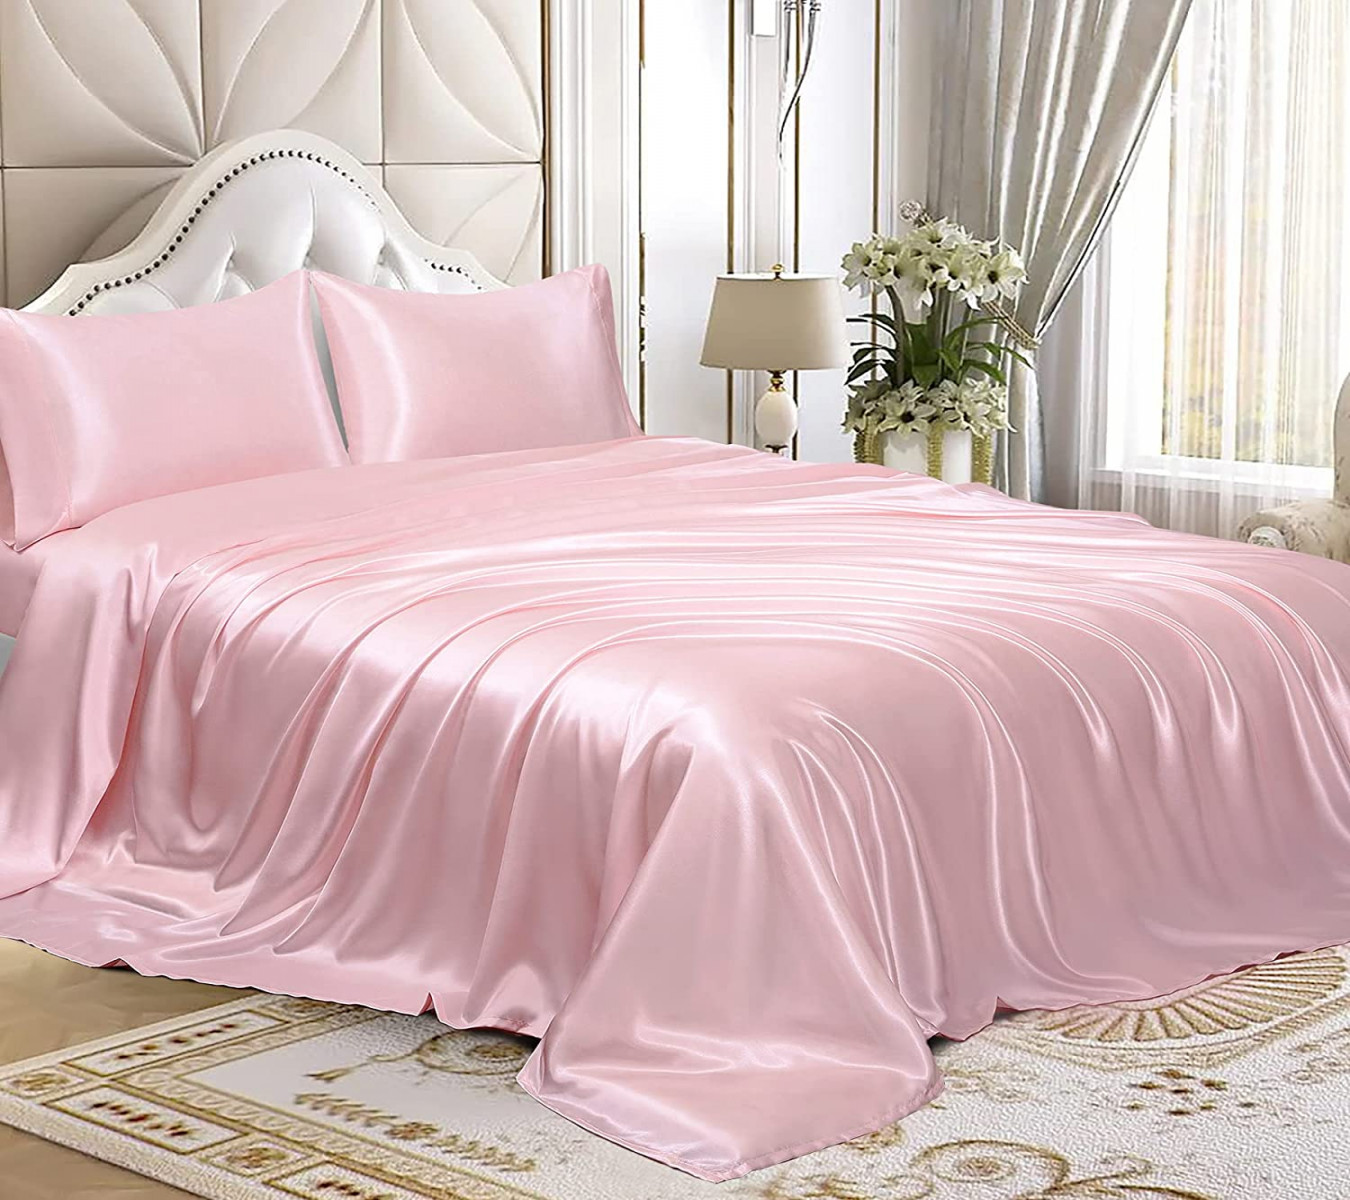 Homiest pcs Satin Sheets Set Luxury Silky Satin Bedding Set with Deep  Pocket,  Fitted Sheet +  Flat Sheet +  Pillowcases (Queen Size, Blush  Pink)